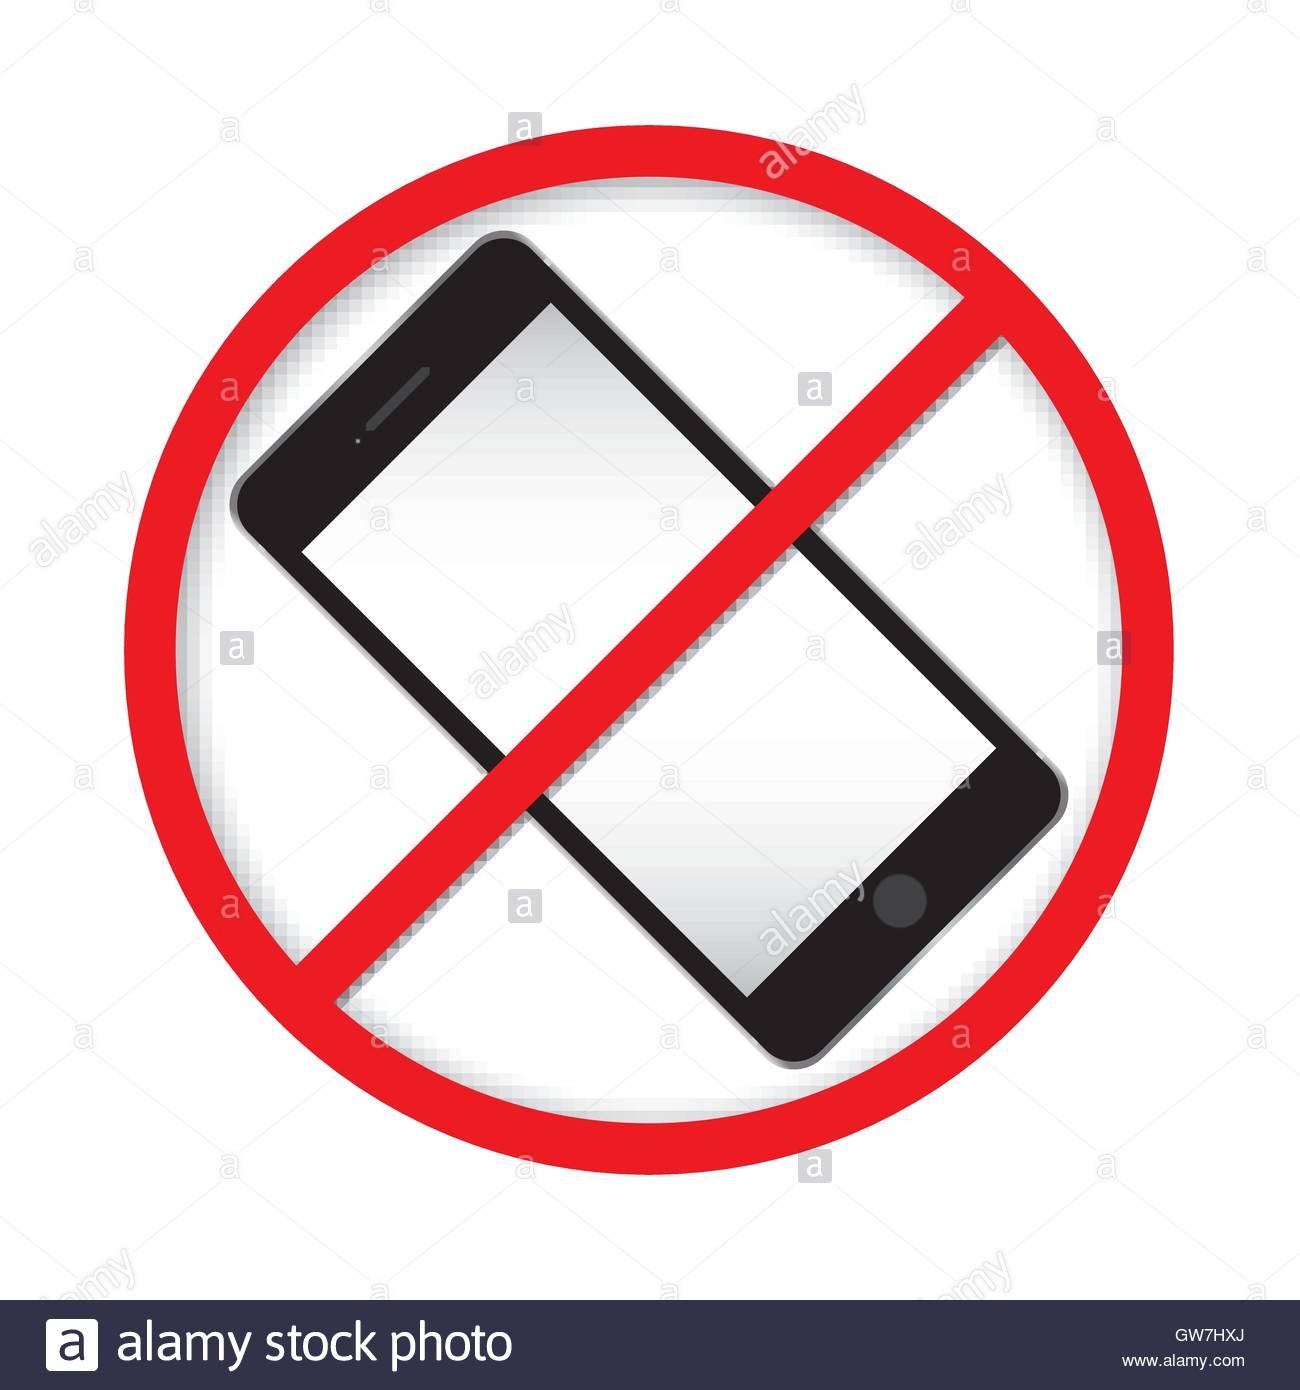 No cell phone sign. Mobile phone ringer volume mute sign. No 